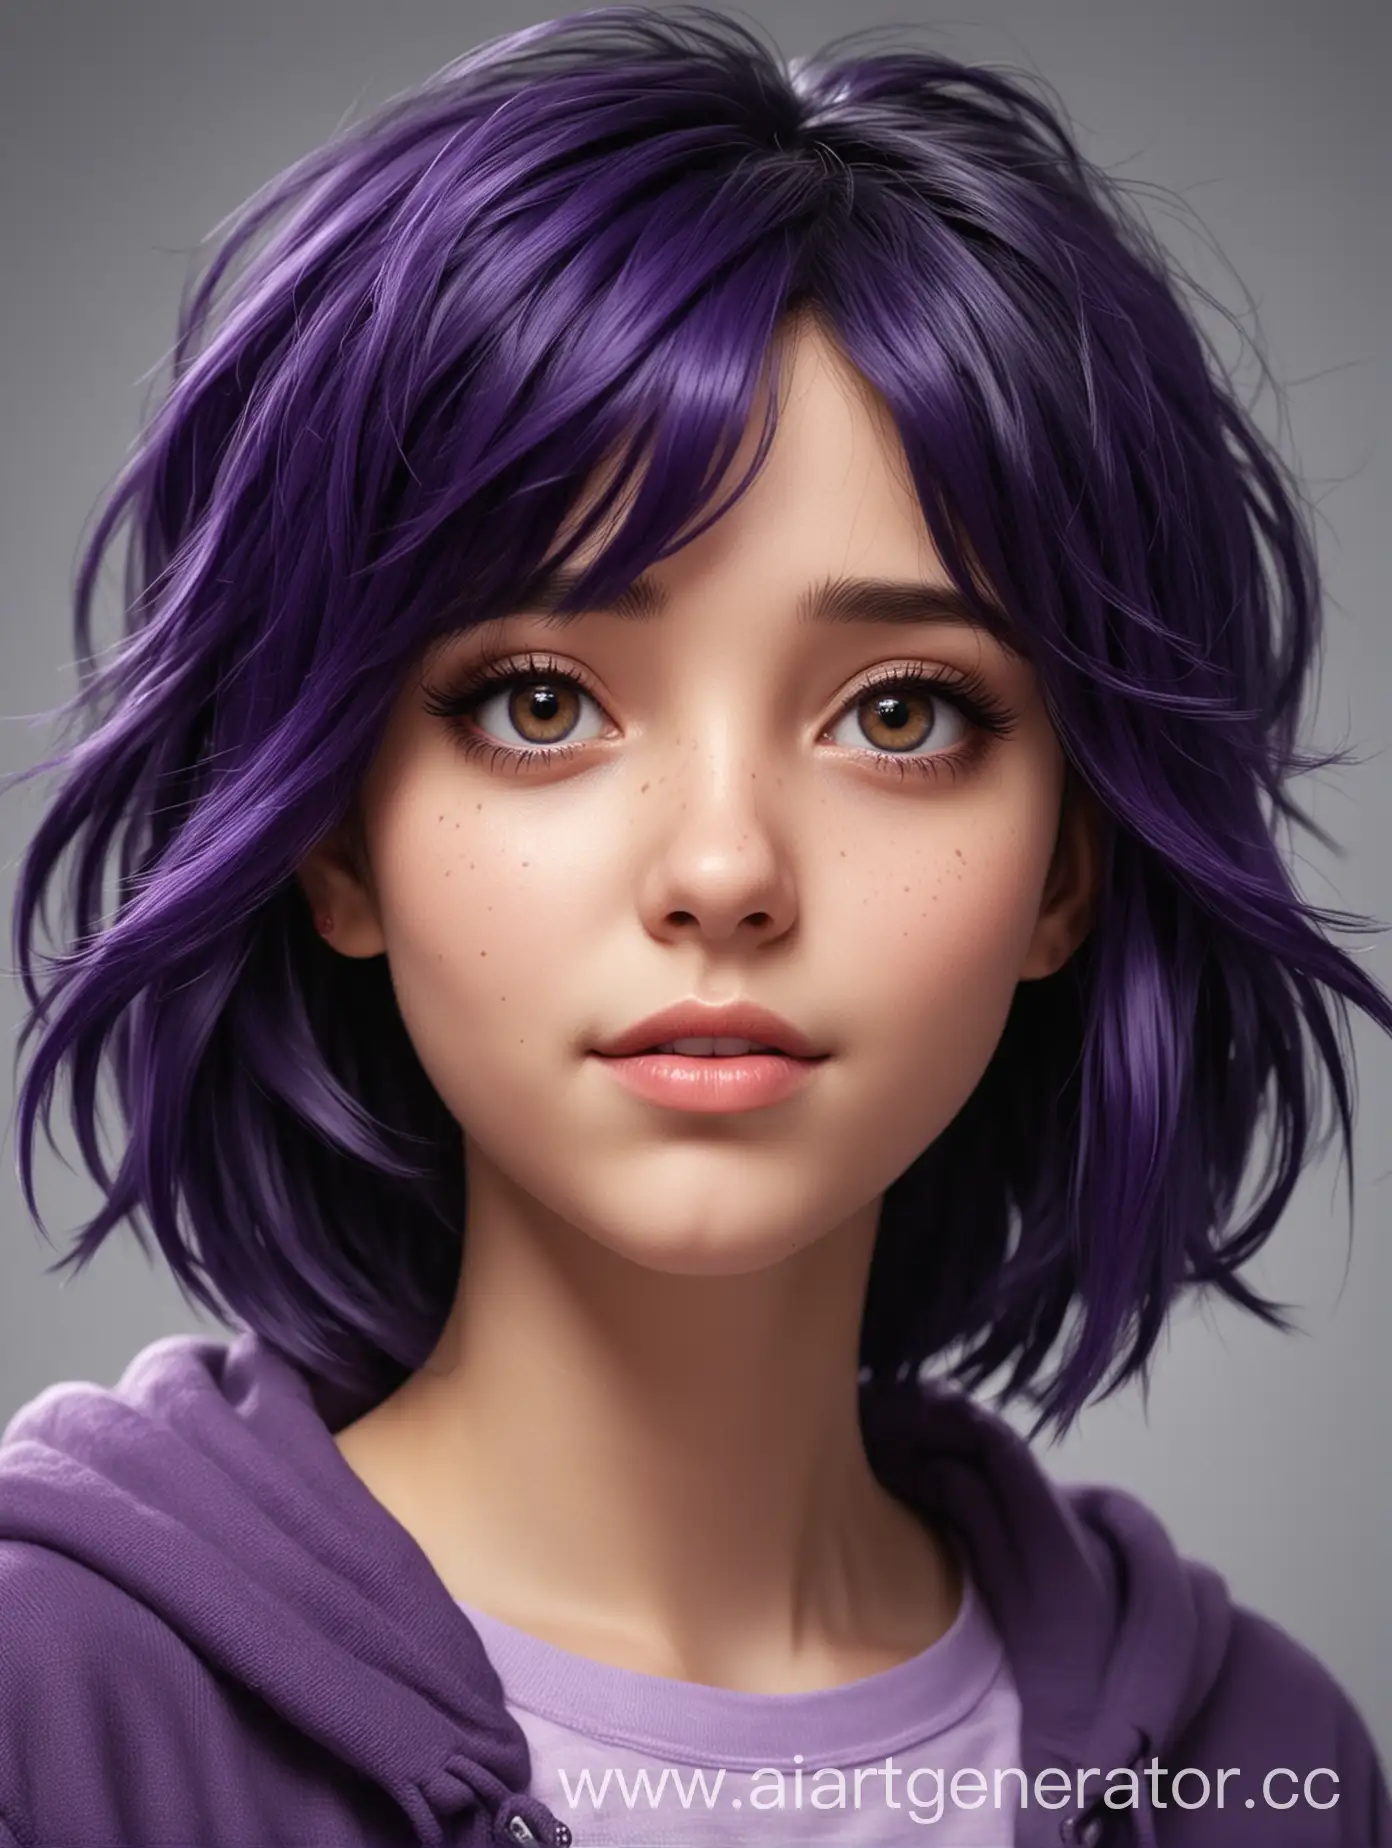 Adorable-Cartoon-Girl-with-Black-and-Purple-Hair